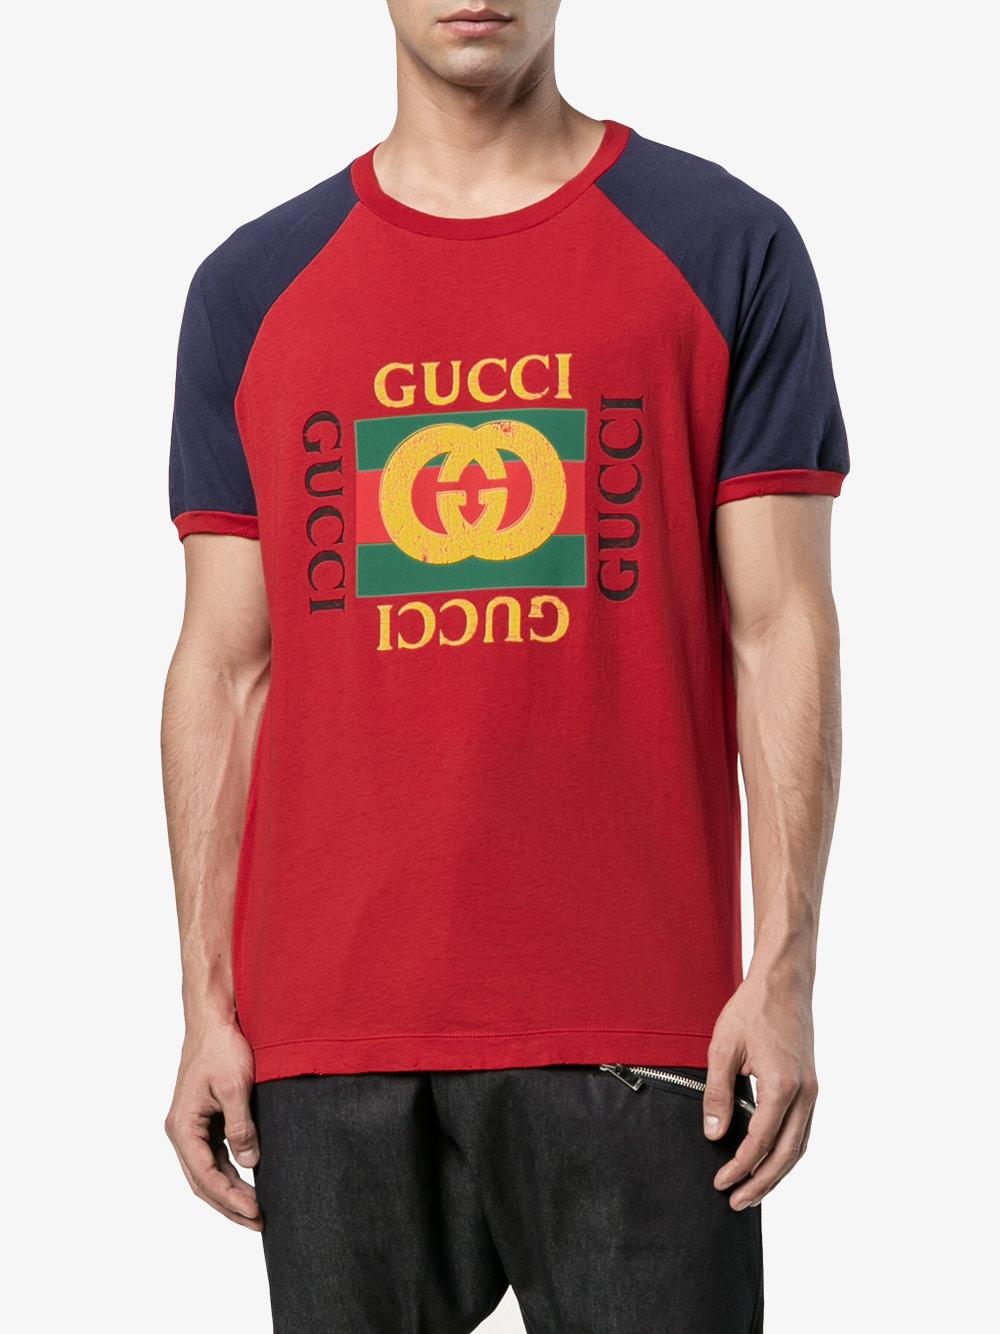 The price is the most important factor in the case of Gucci replica ...